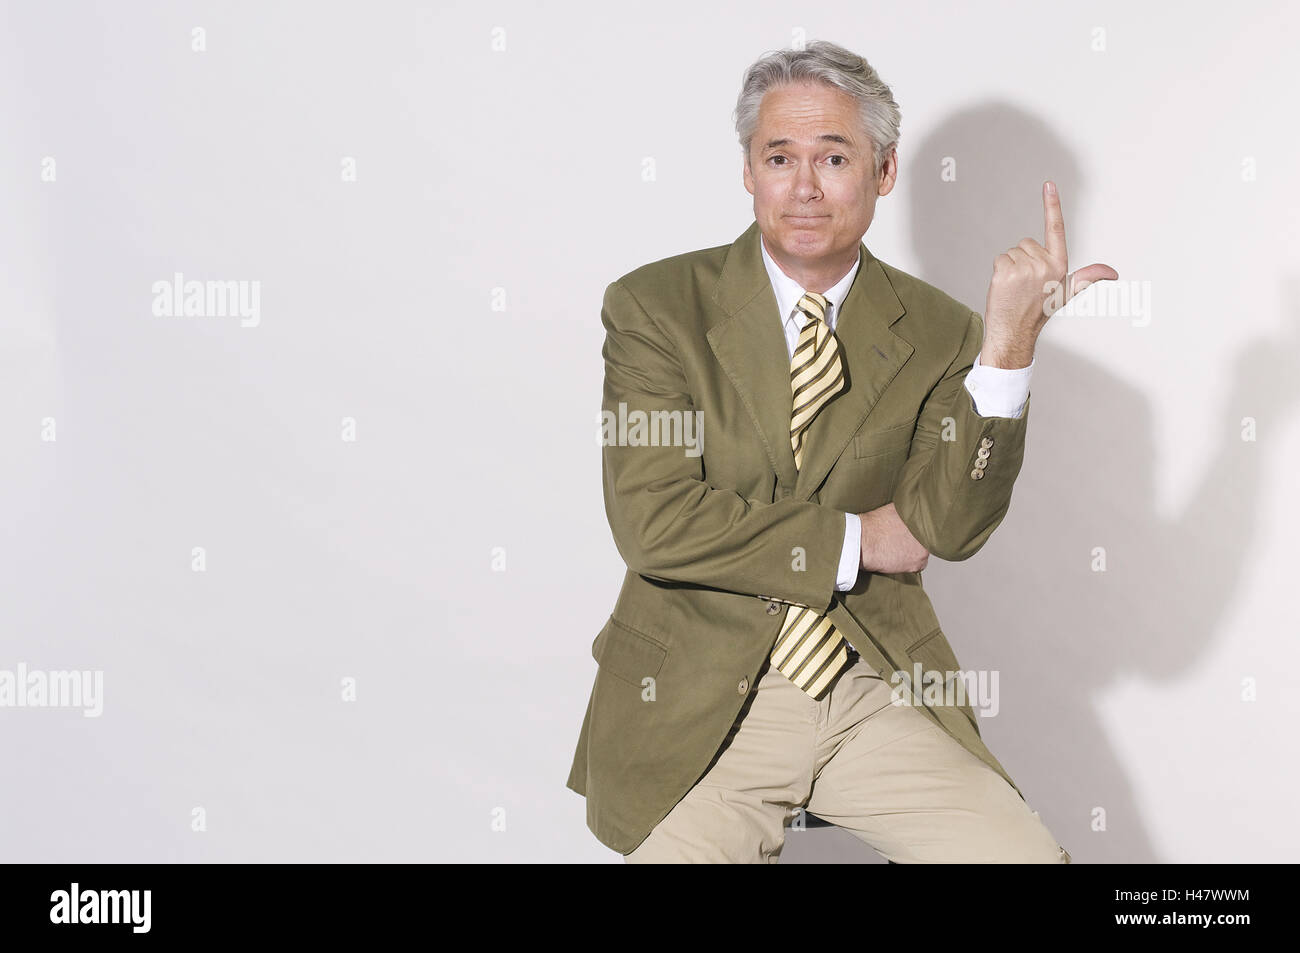 Man, middle age, gesture, Stock Photo